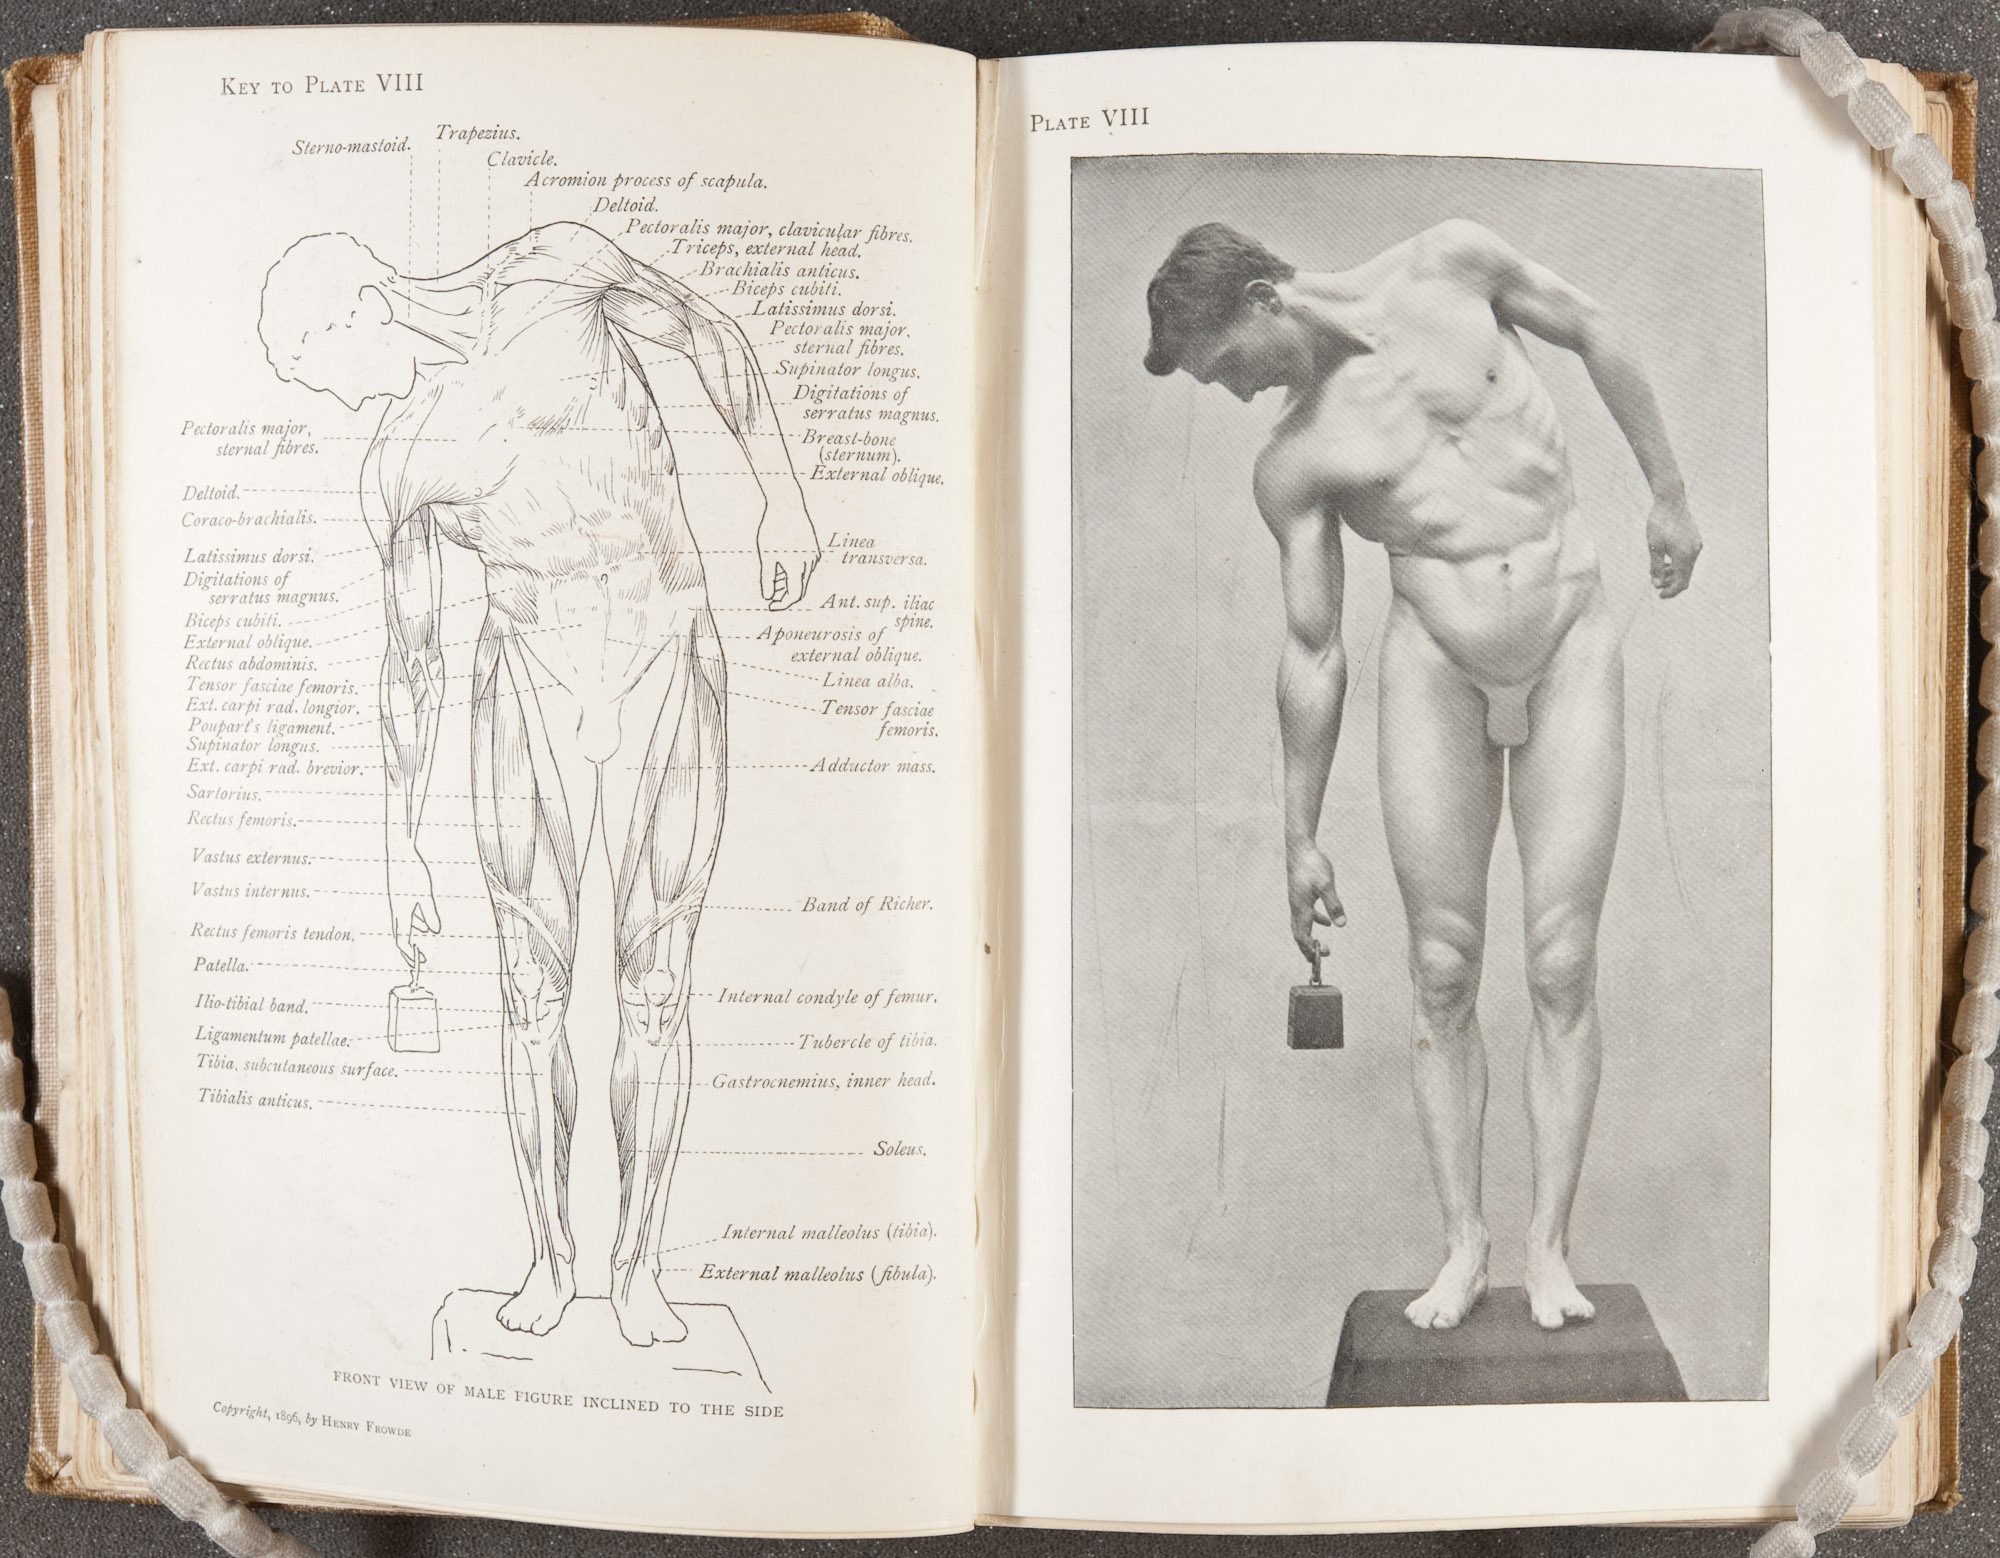 "Front view of male figure inclined to the side," page 62 of Arthur Thomson's A handbook of anatomy for art students (1896). St Andrews copy at Photo NC760.T5  